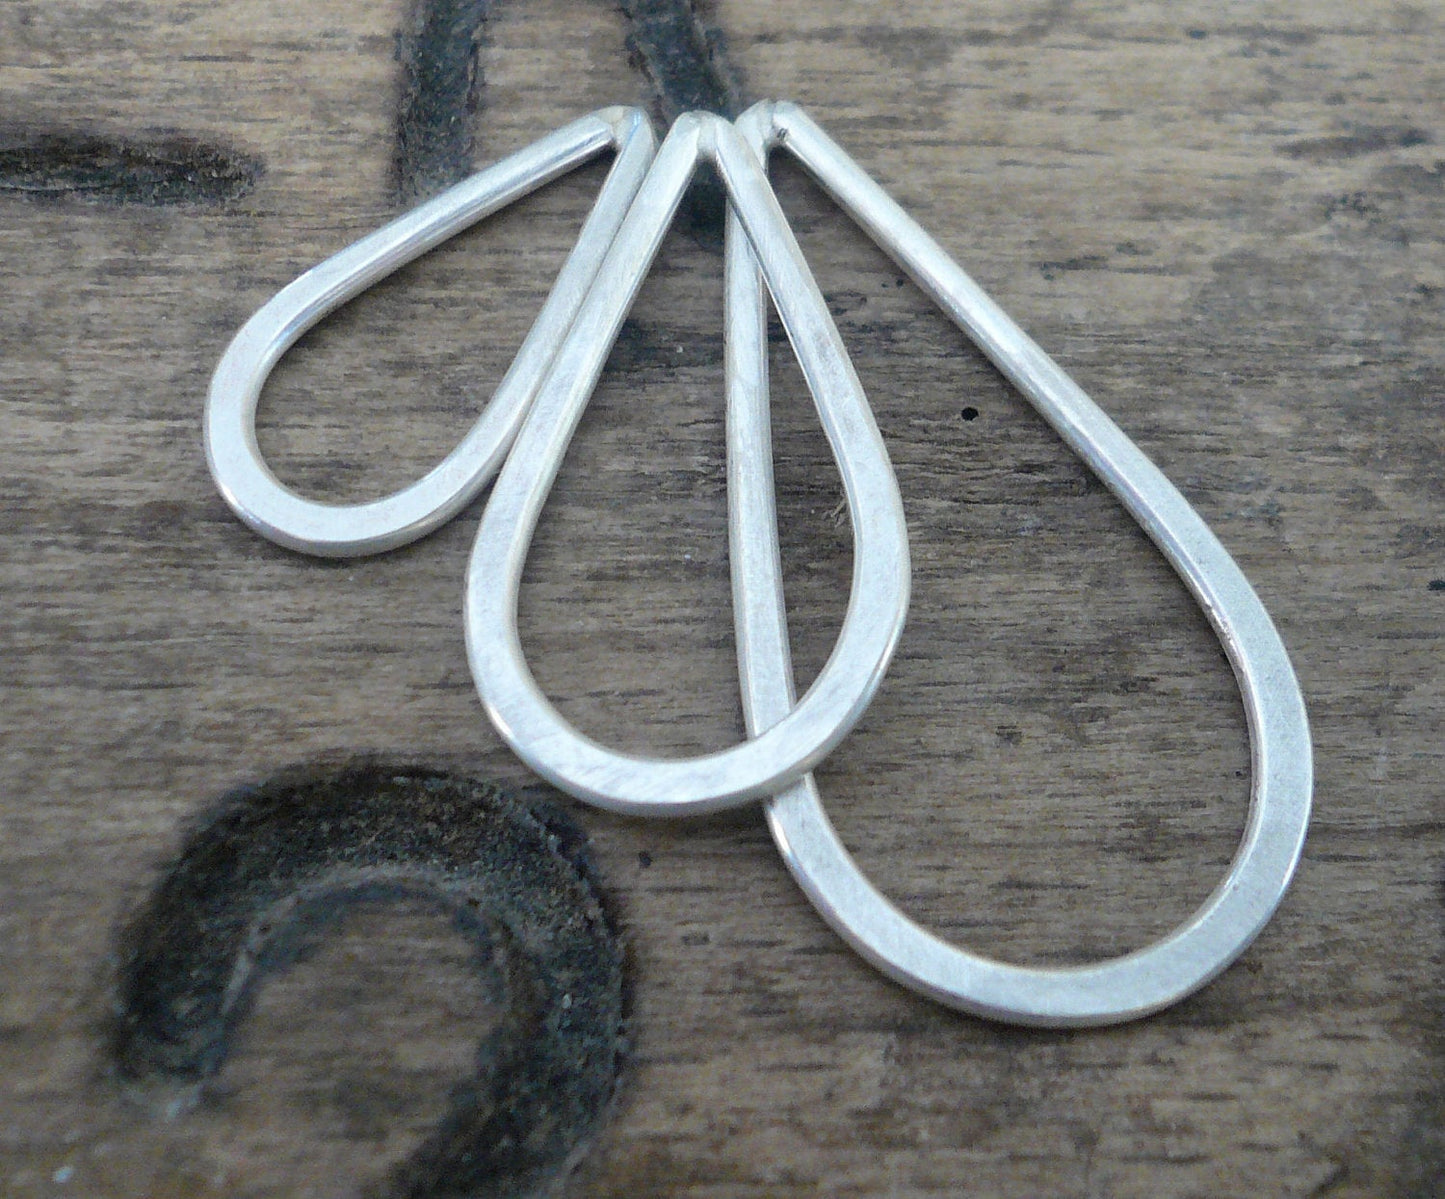 Small Hammered Handforged Sterling Silver Tear Drops - Handmade. Hand forged. 17mm. 1 pair